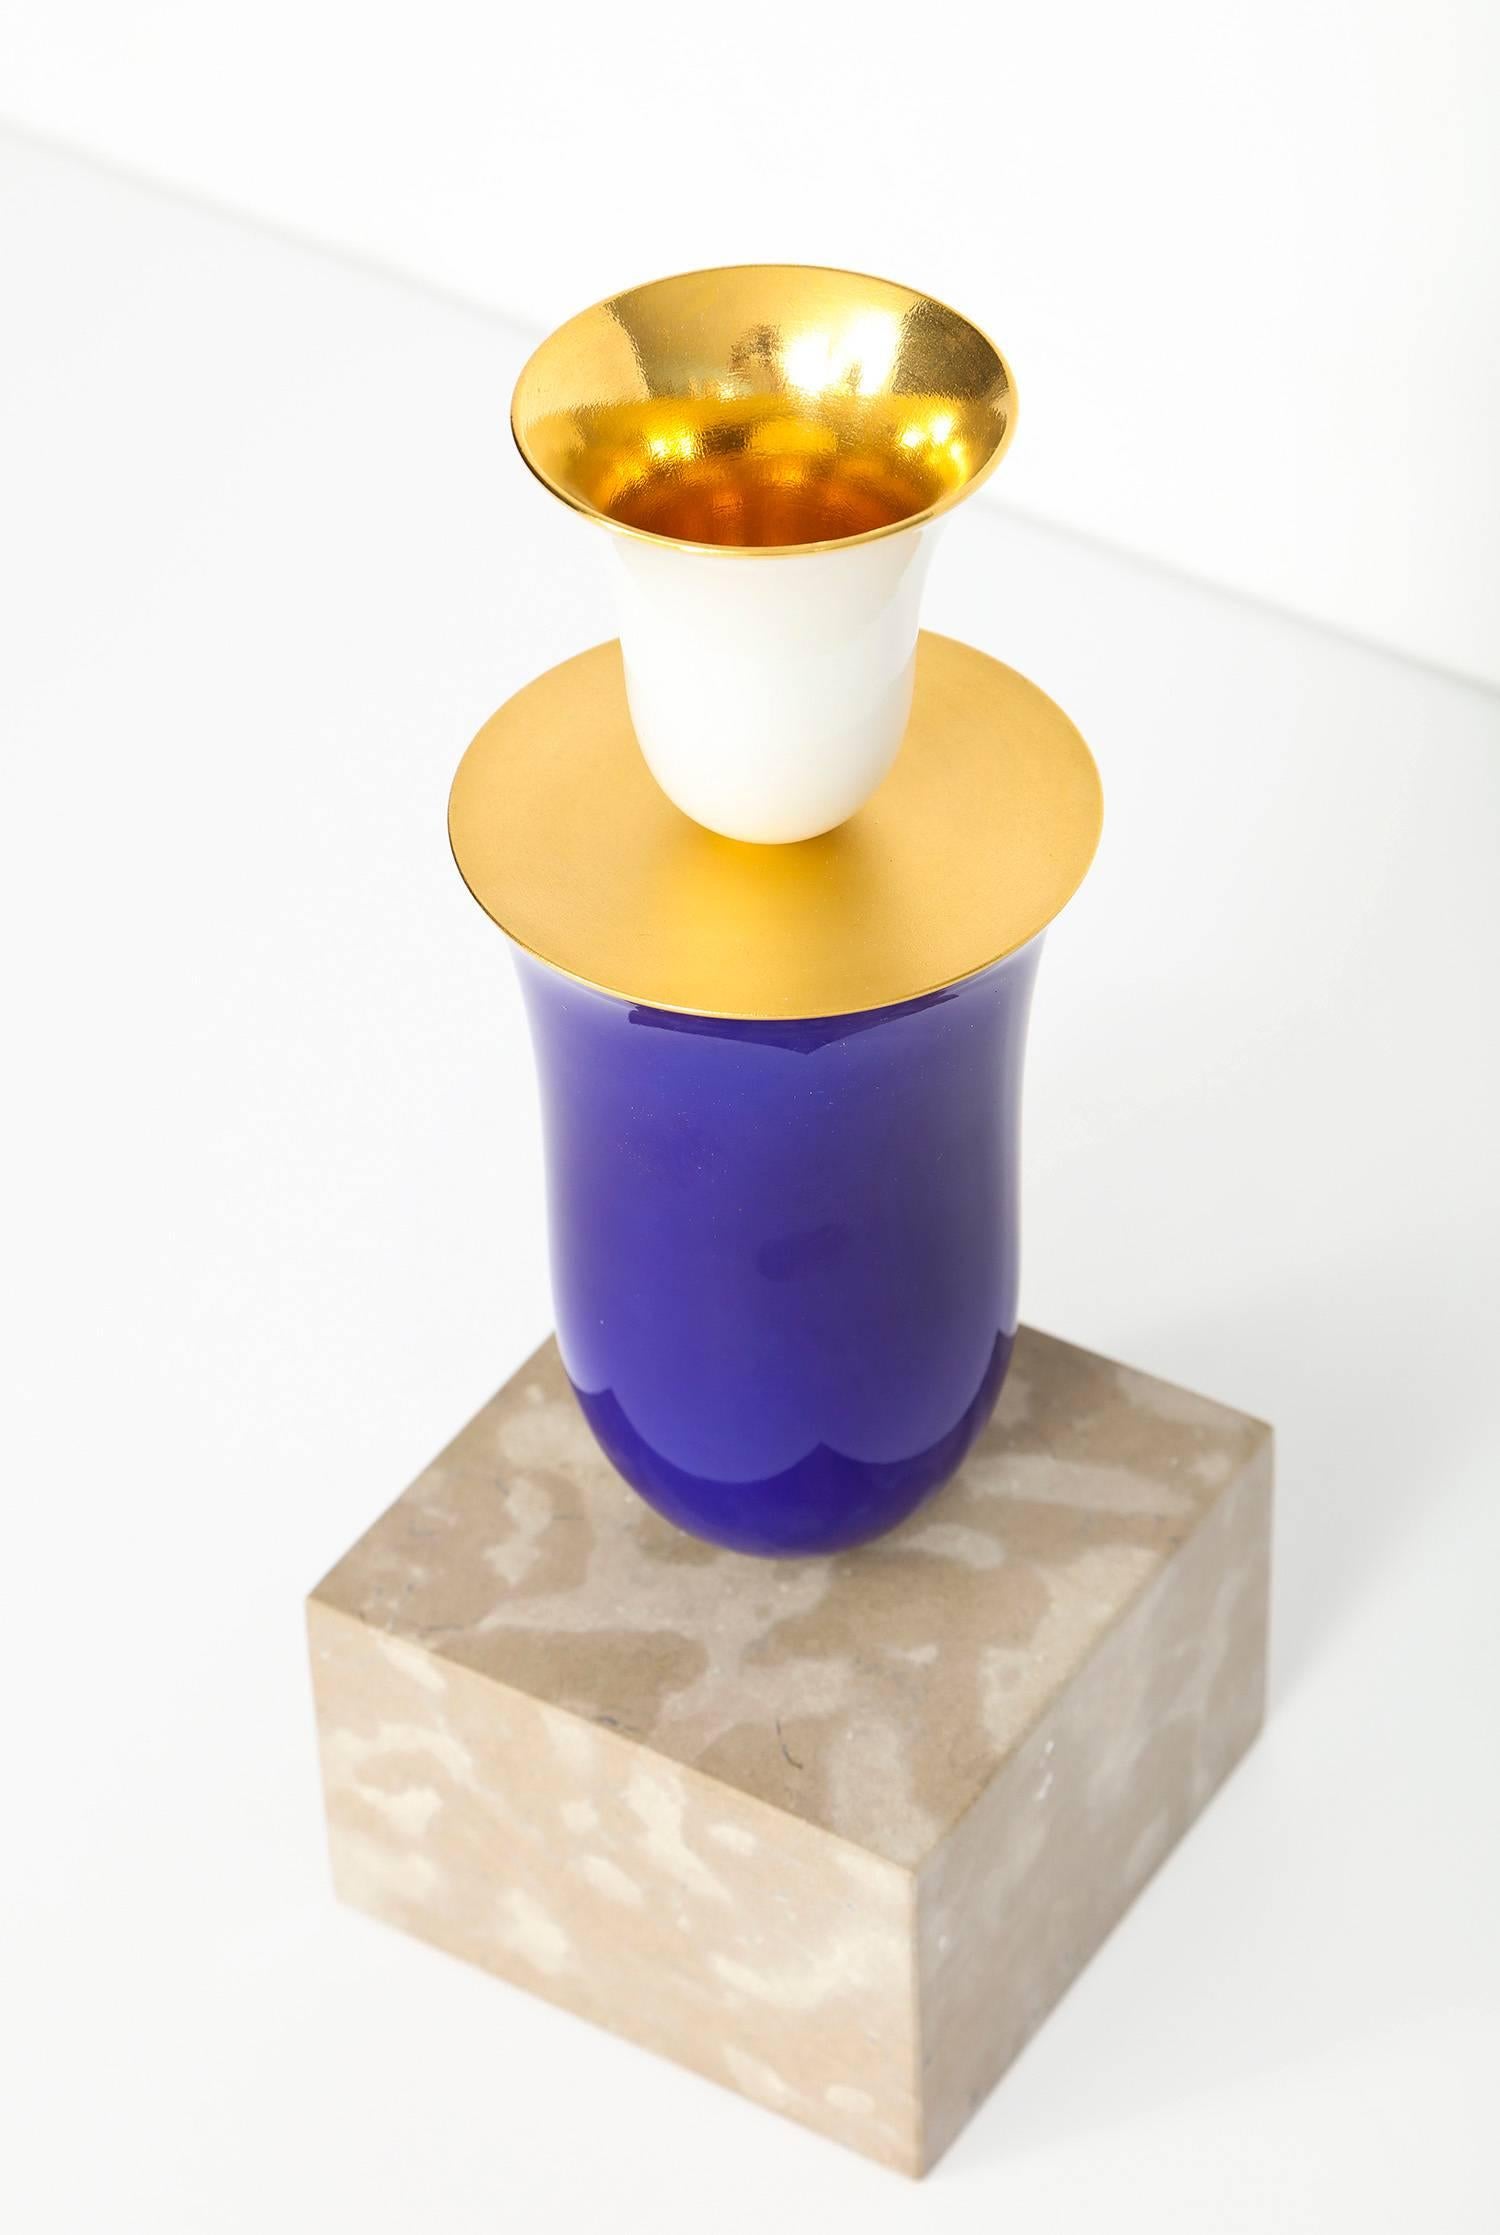 Rare “Laure” vase by Ettore Sottsass for Sevres. From an edition of porcelain creations Sottsass designed for Sevres. Brightly glazed porcelain on a stone pedestal. This model was only in production from 1994-1996. Signed on underside. Excellent